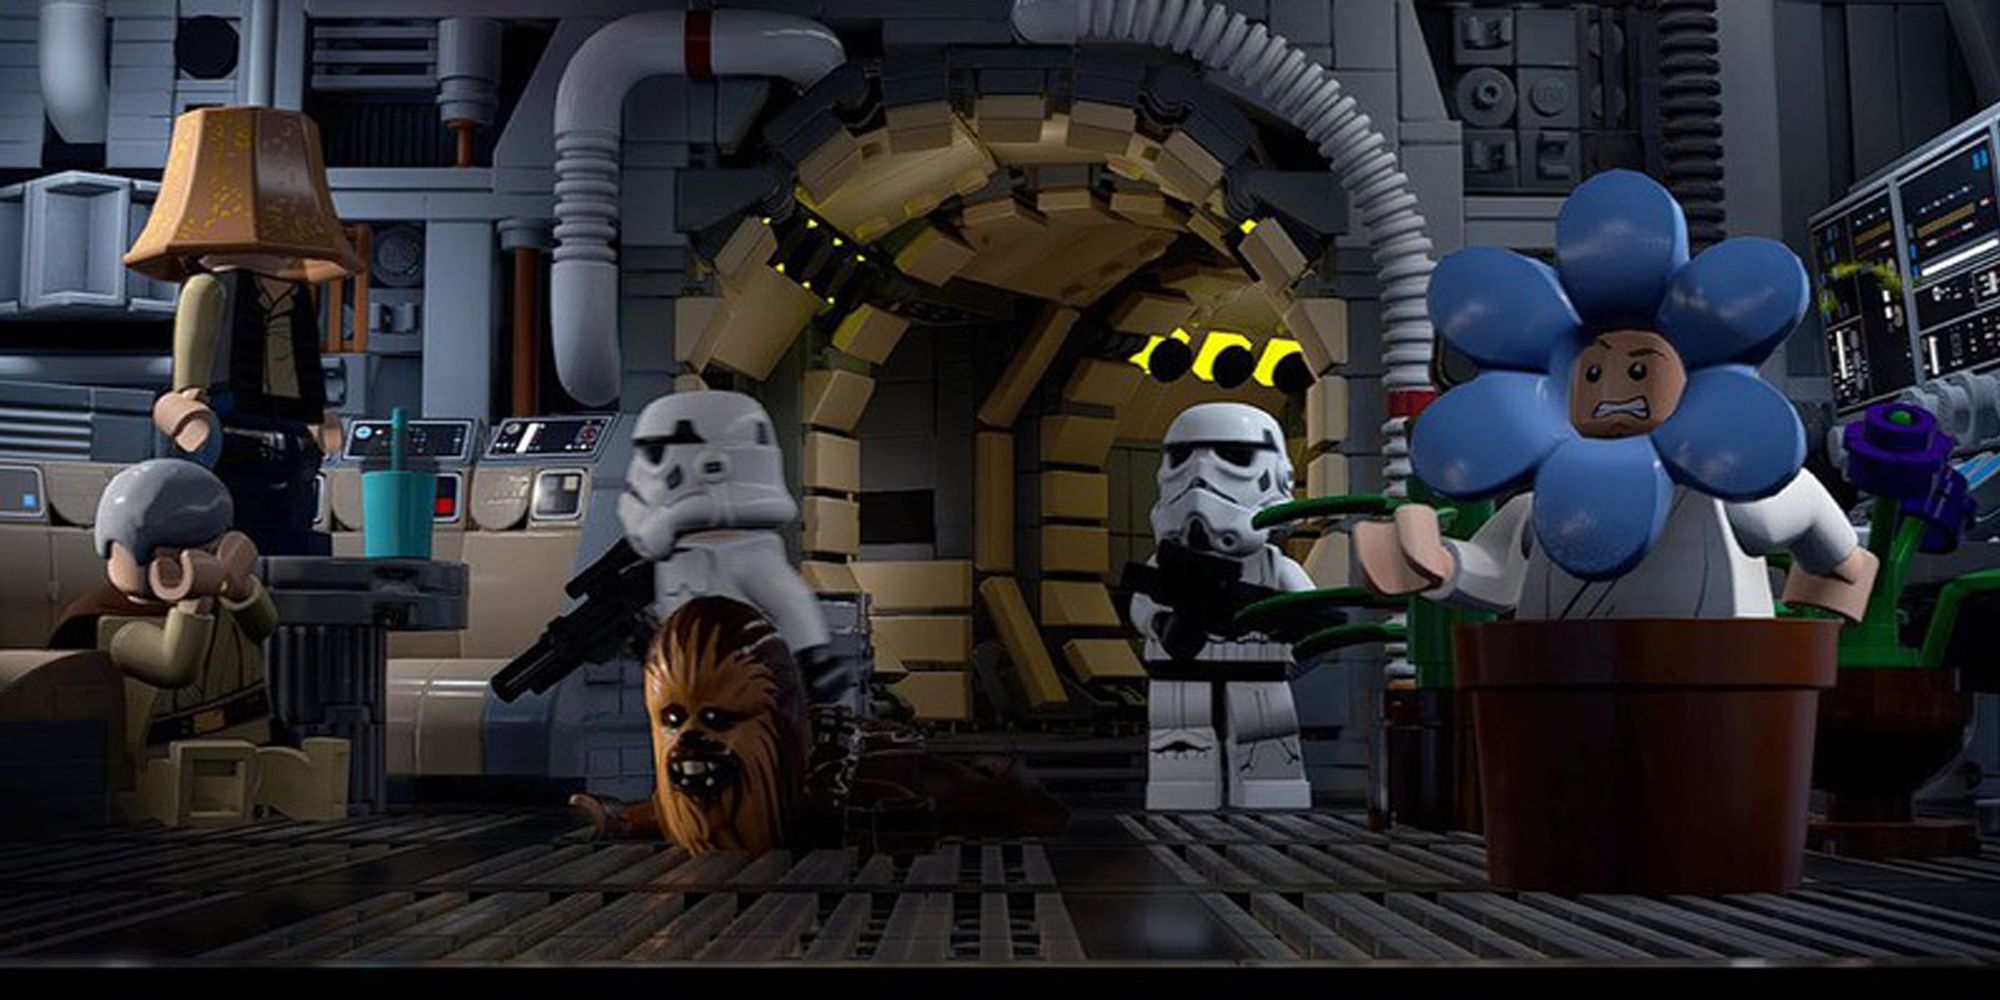 Stormtroopers And A Disguised Millenium Falcon Crew In Lego Star Wars: The Skywalker Saga